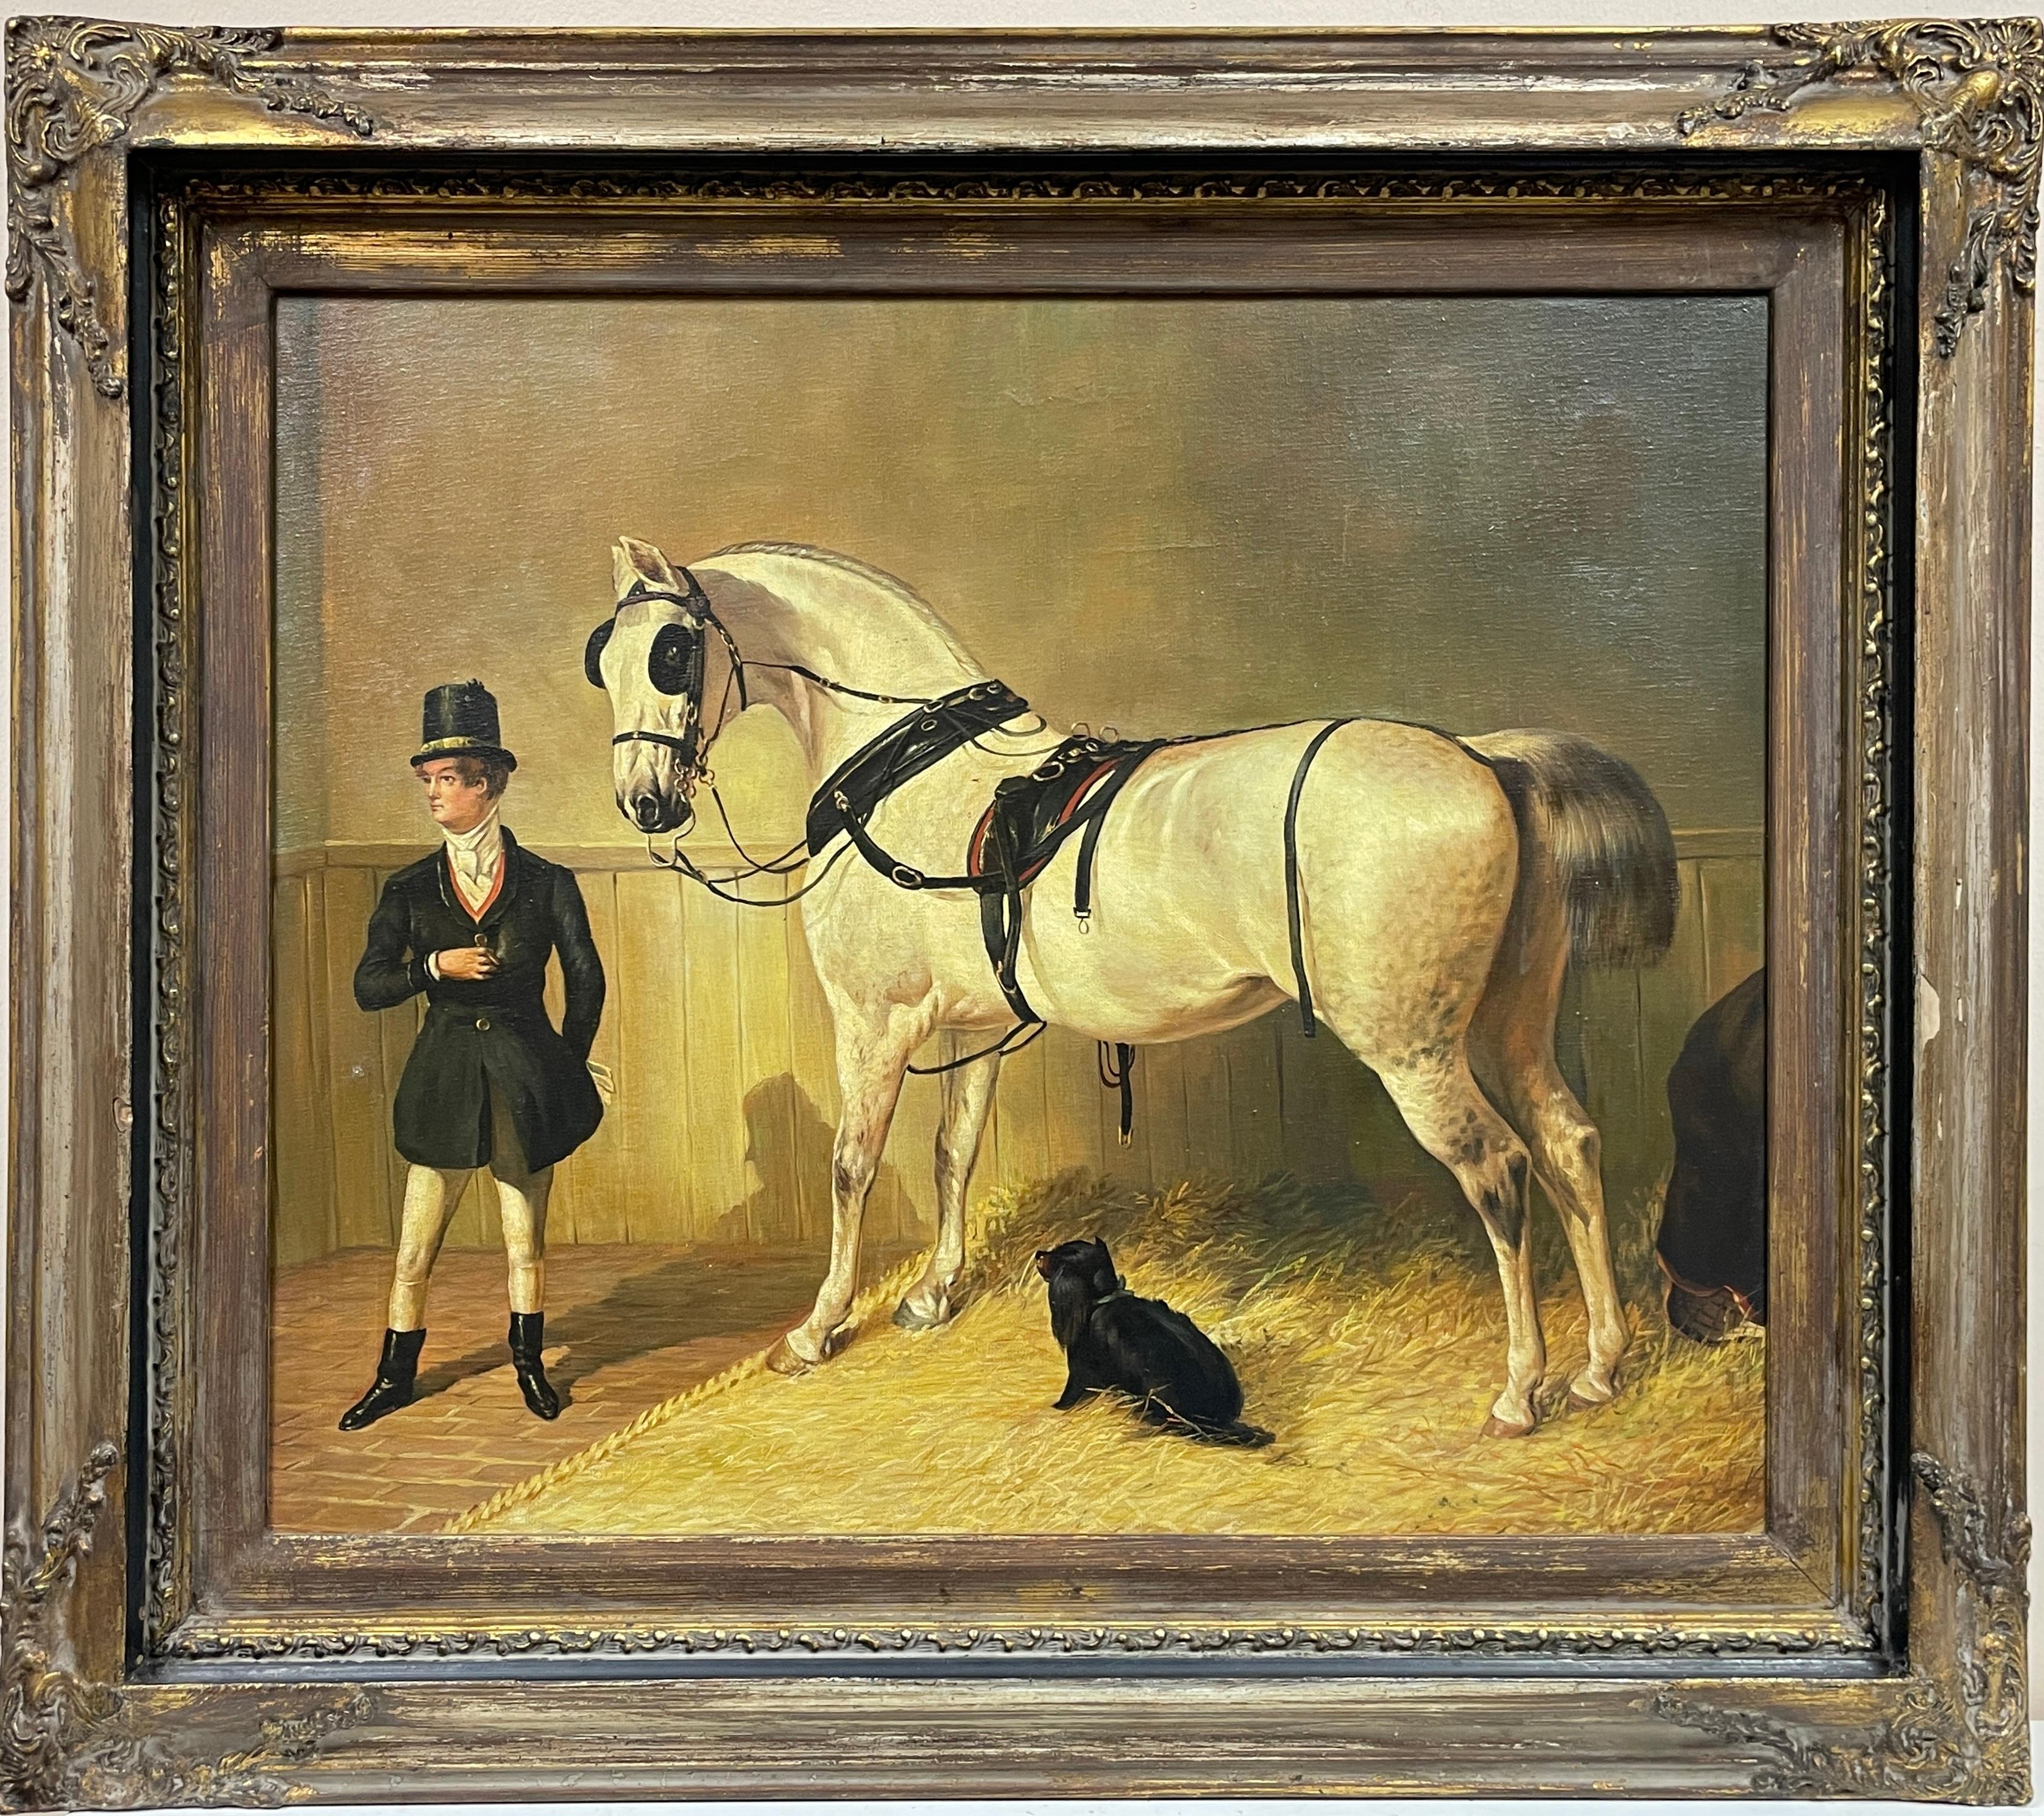 Fine Sporting Art Painting Gentleman with Horse & Dog in Stable Interior 1